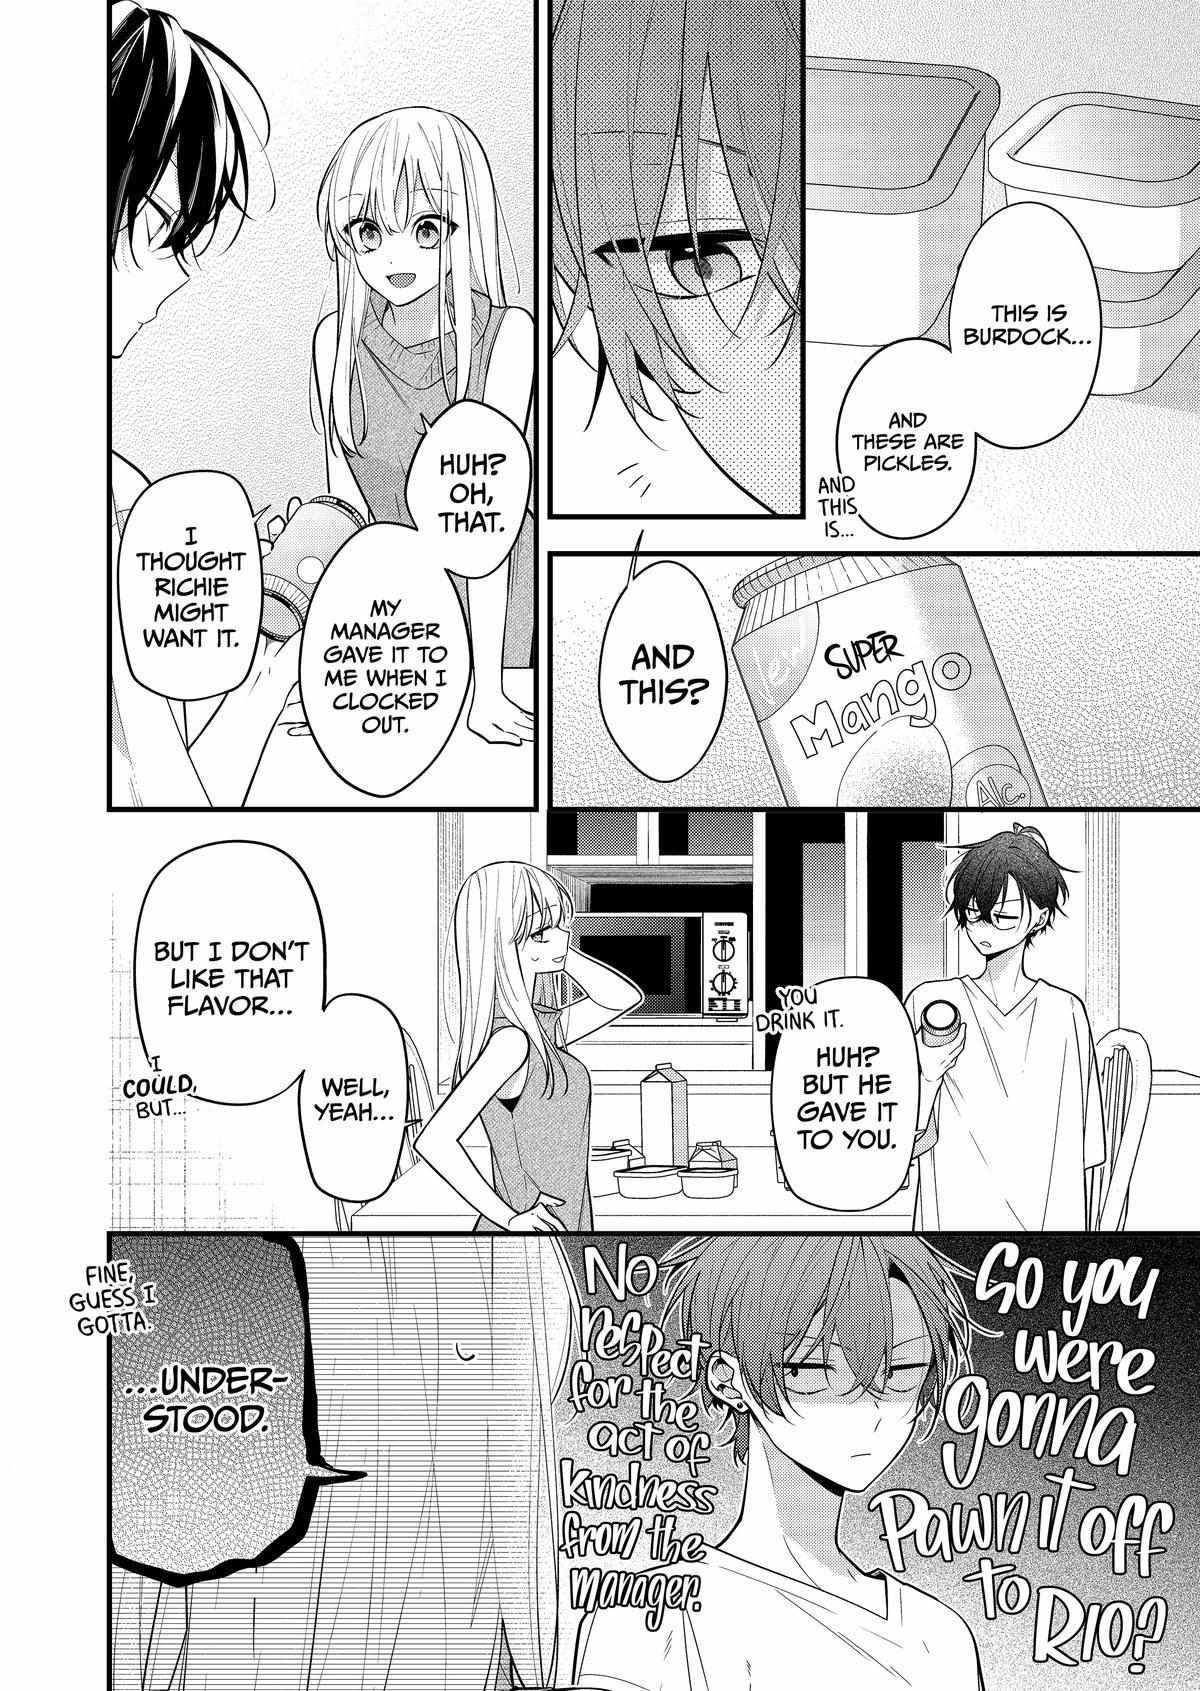 The Story Of A Guy Who Fell In Love With His Friend's Sister - Page 1